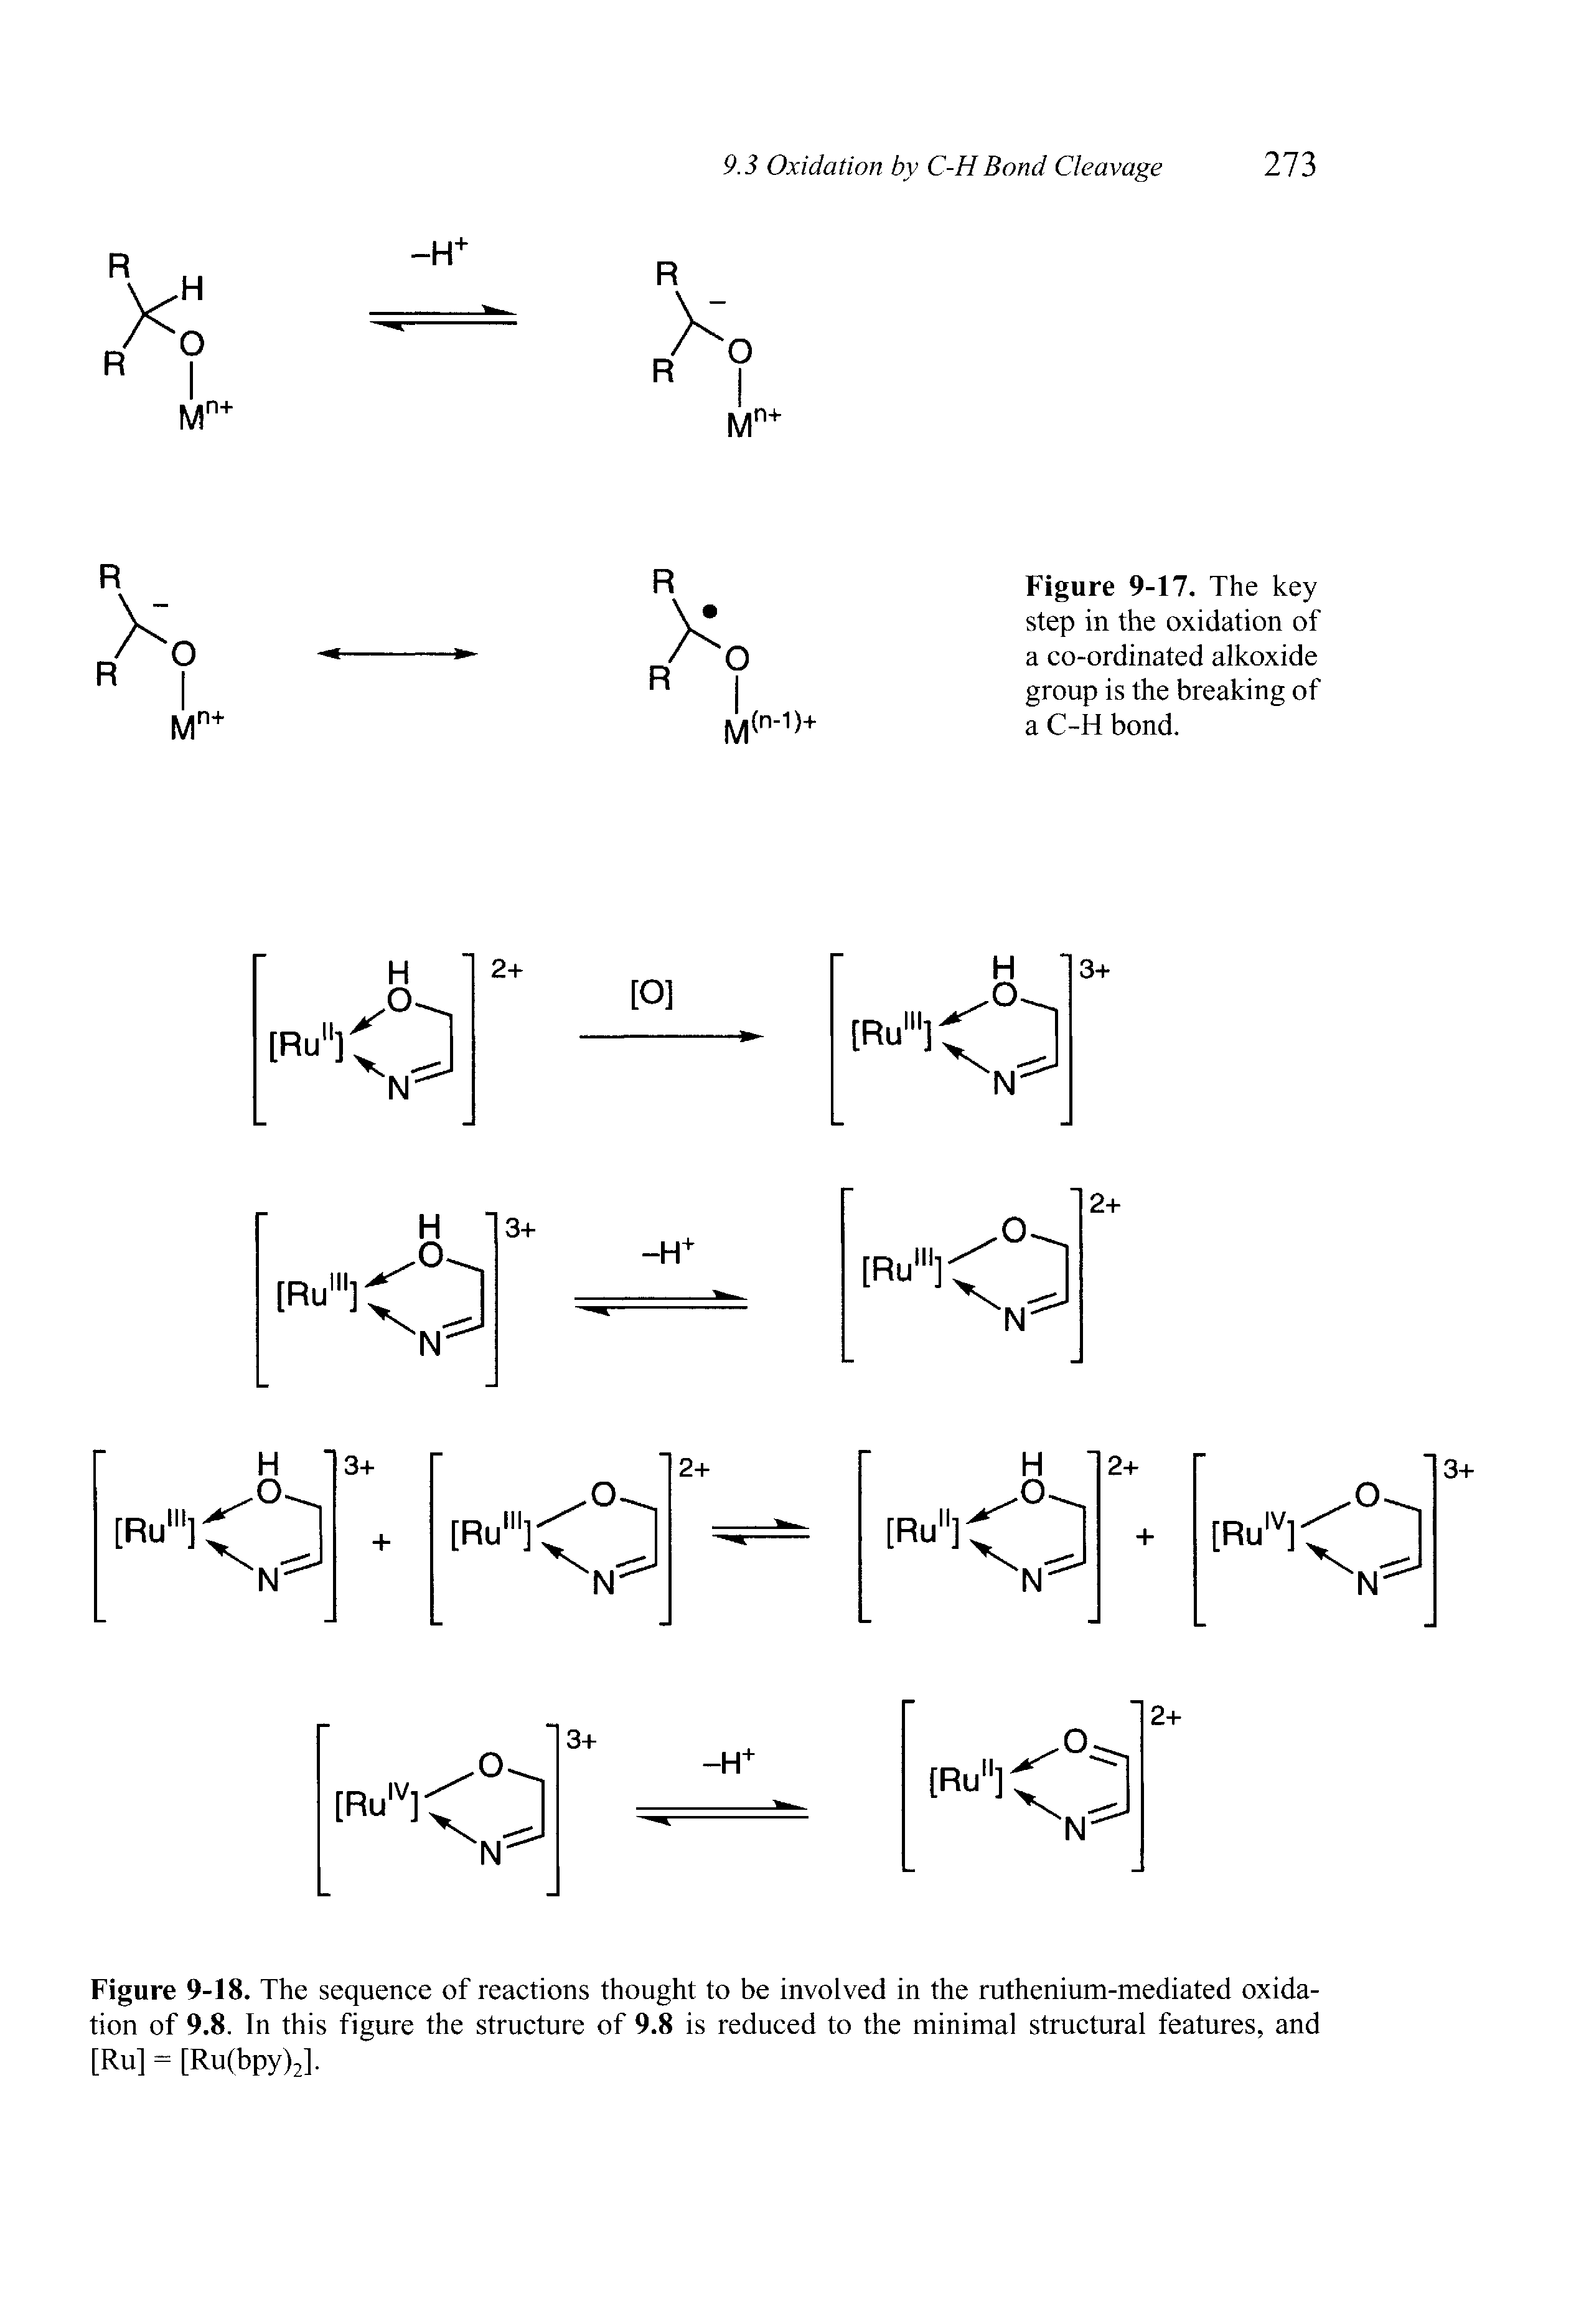 Figure 9-18. The sequence of reactions thought to be involved in the ruthenium-mediated oxidation of 9.8. In this figure the structure of 9.8 is reduced to the minimal structural features, and [Ru] = [Ru(bpy)2].